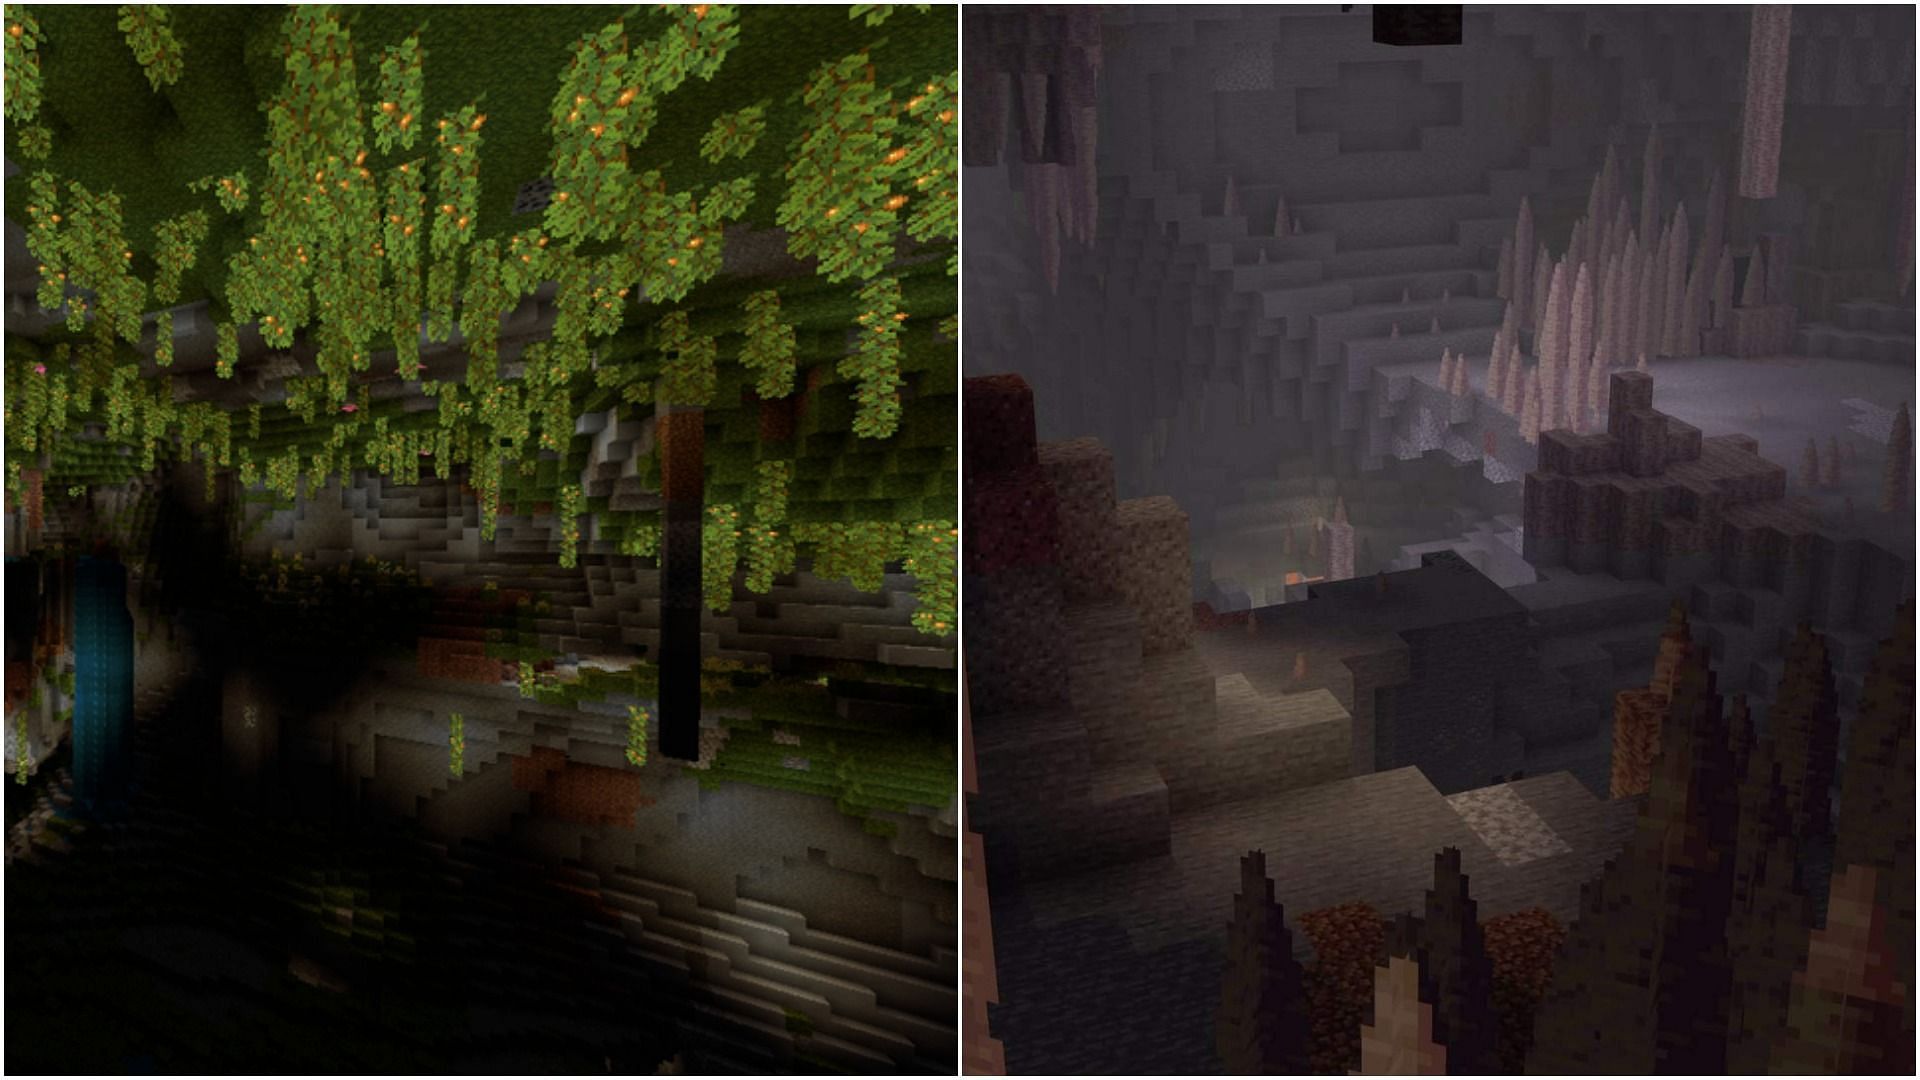 Lush Caves more liked than Dripstone Caves (Image via Minecraft)